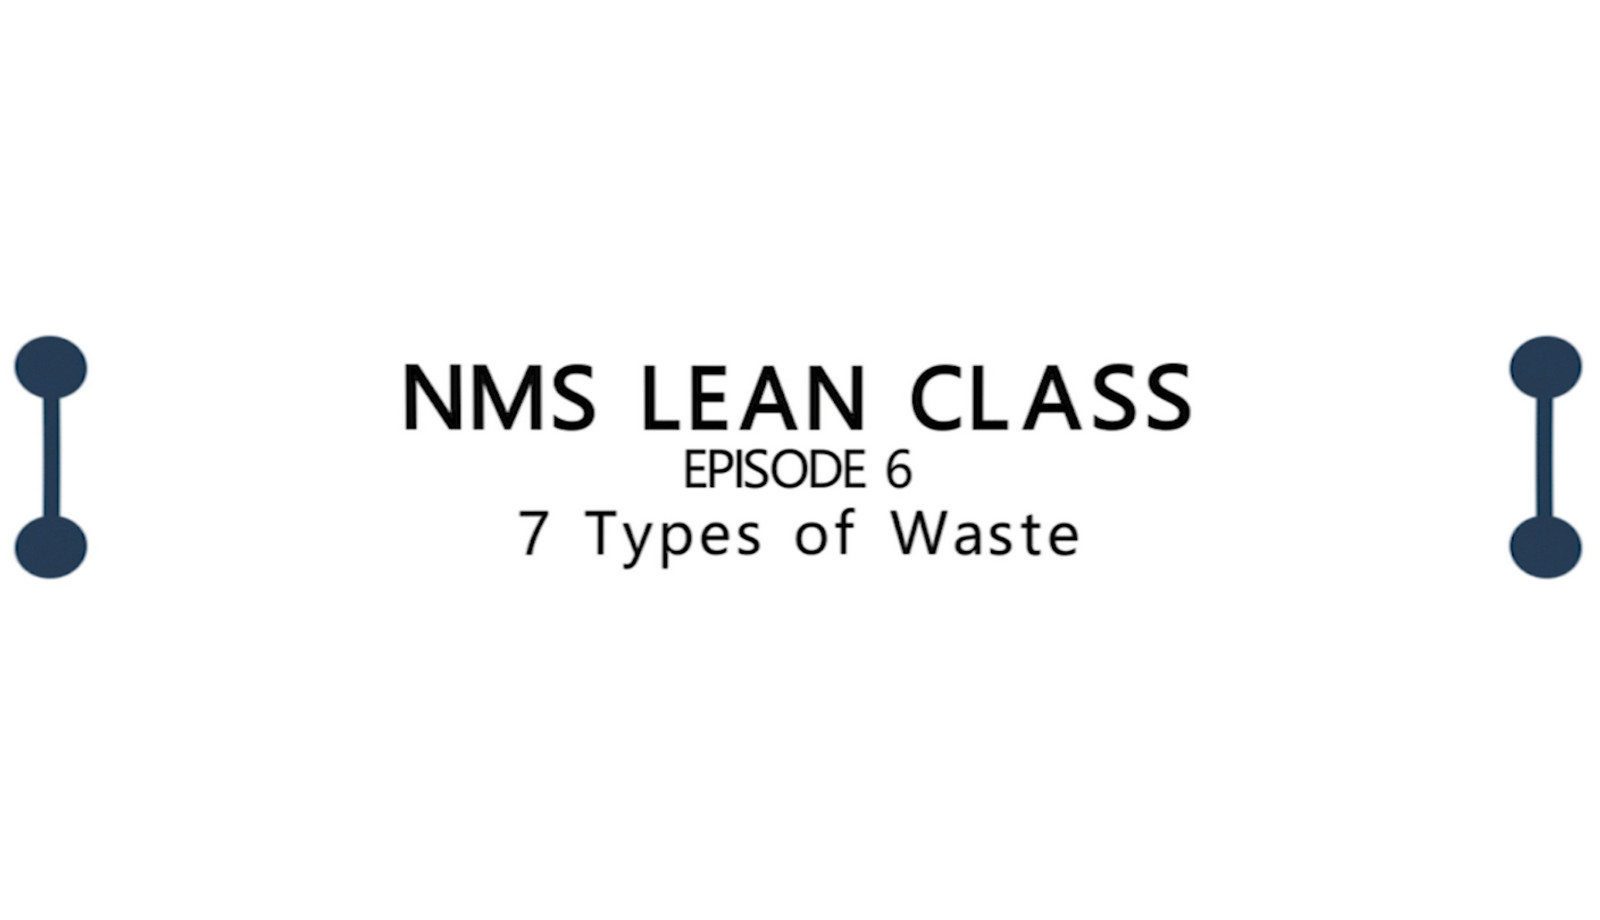 NMS Learn Class Episode 6 - Seven Types of Waste